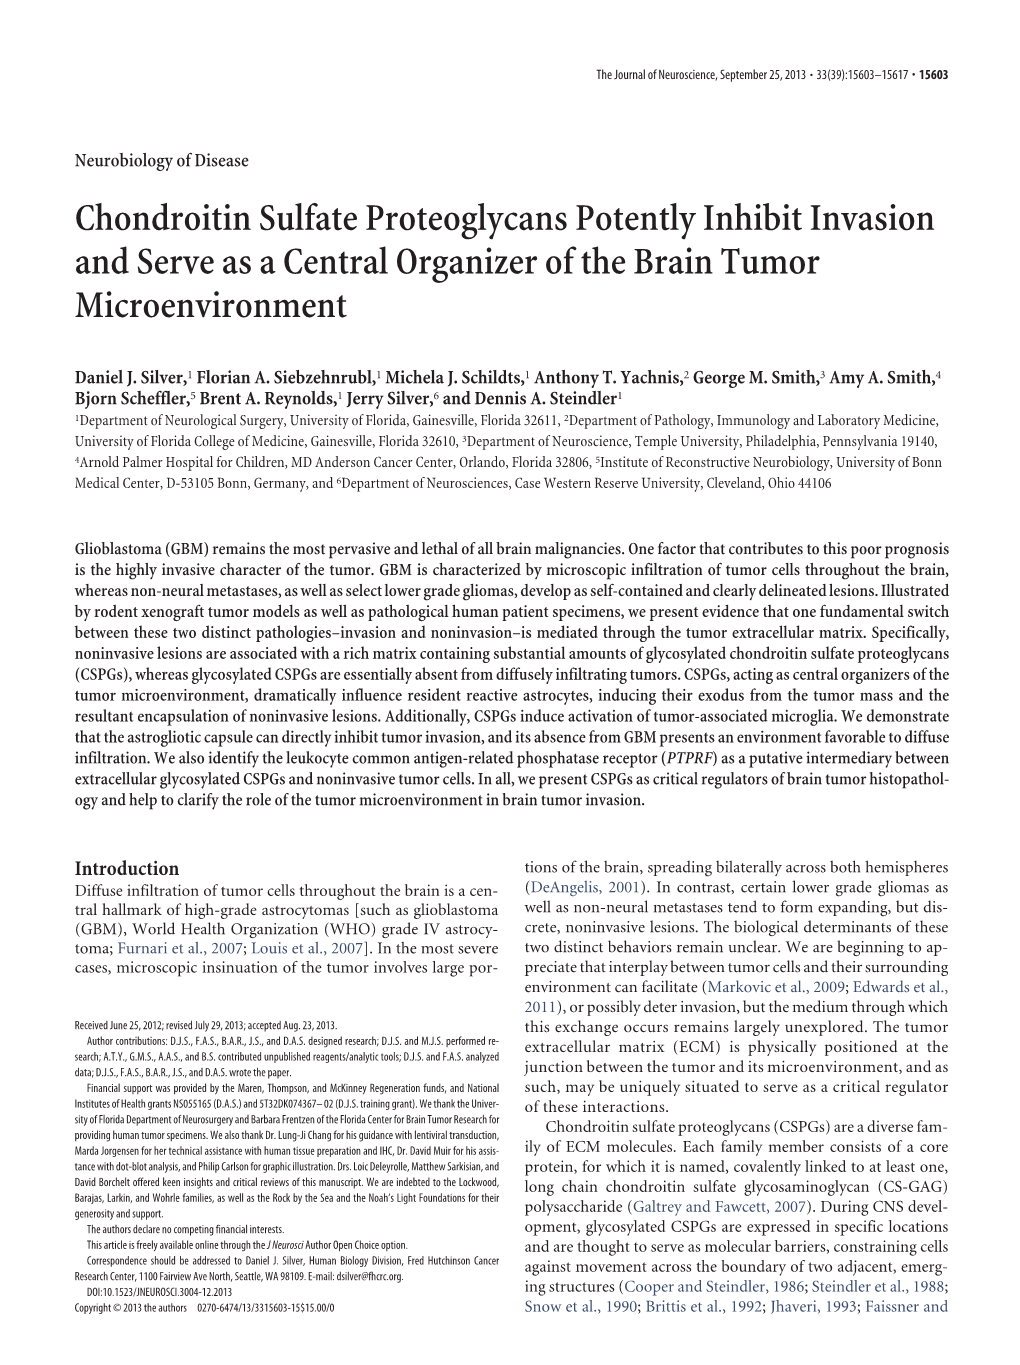 Chondroitin Sulfate Proteoglycans Potently Inhibit Invasion and Serve As a Central Organizer of the Brain Tumor Microenvironment